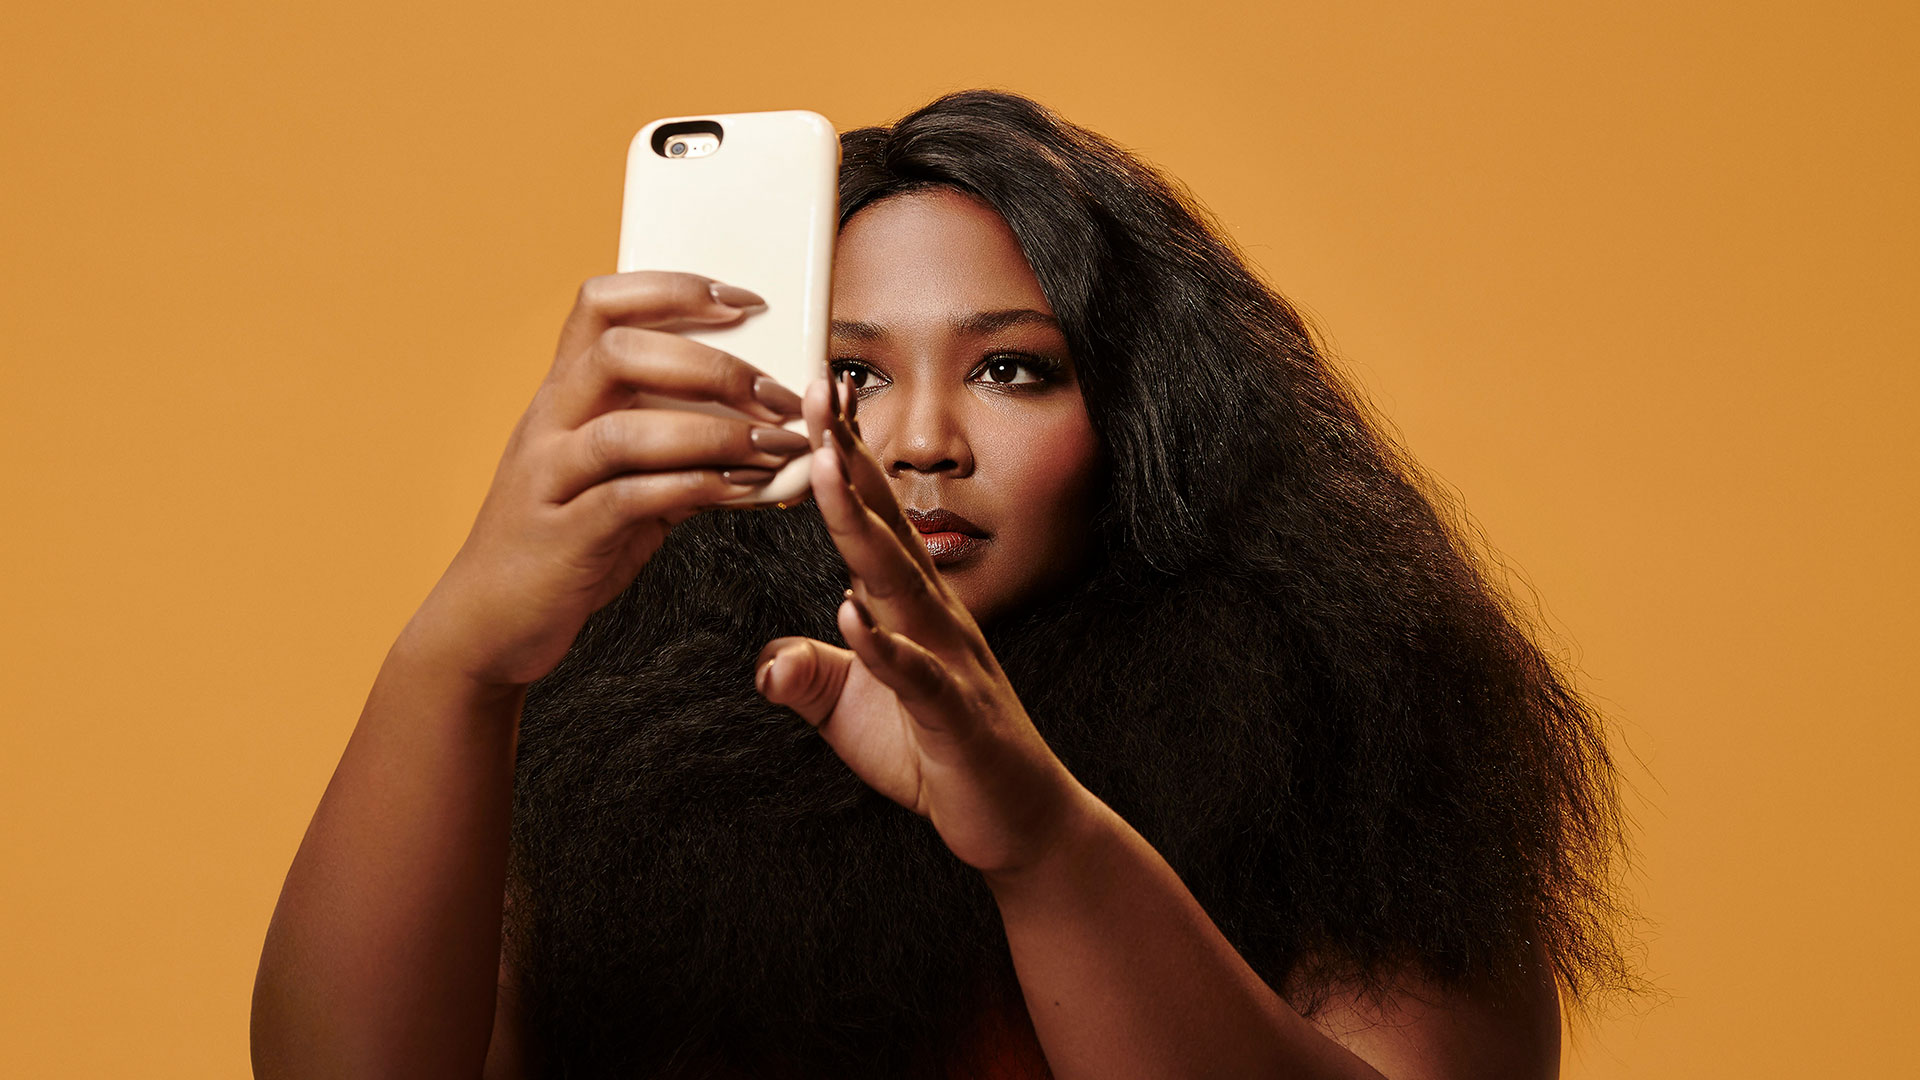 Lizzo on the phone